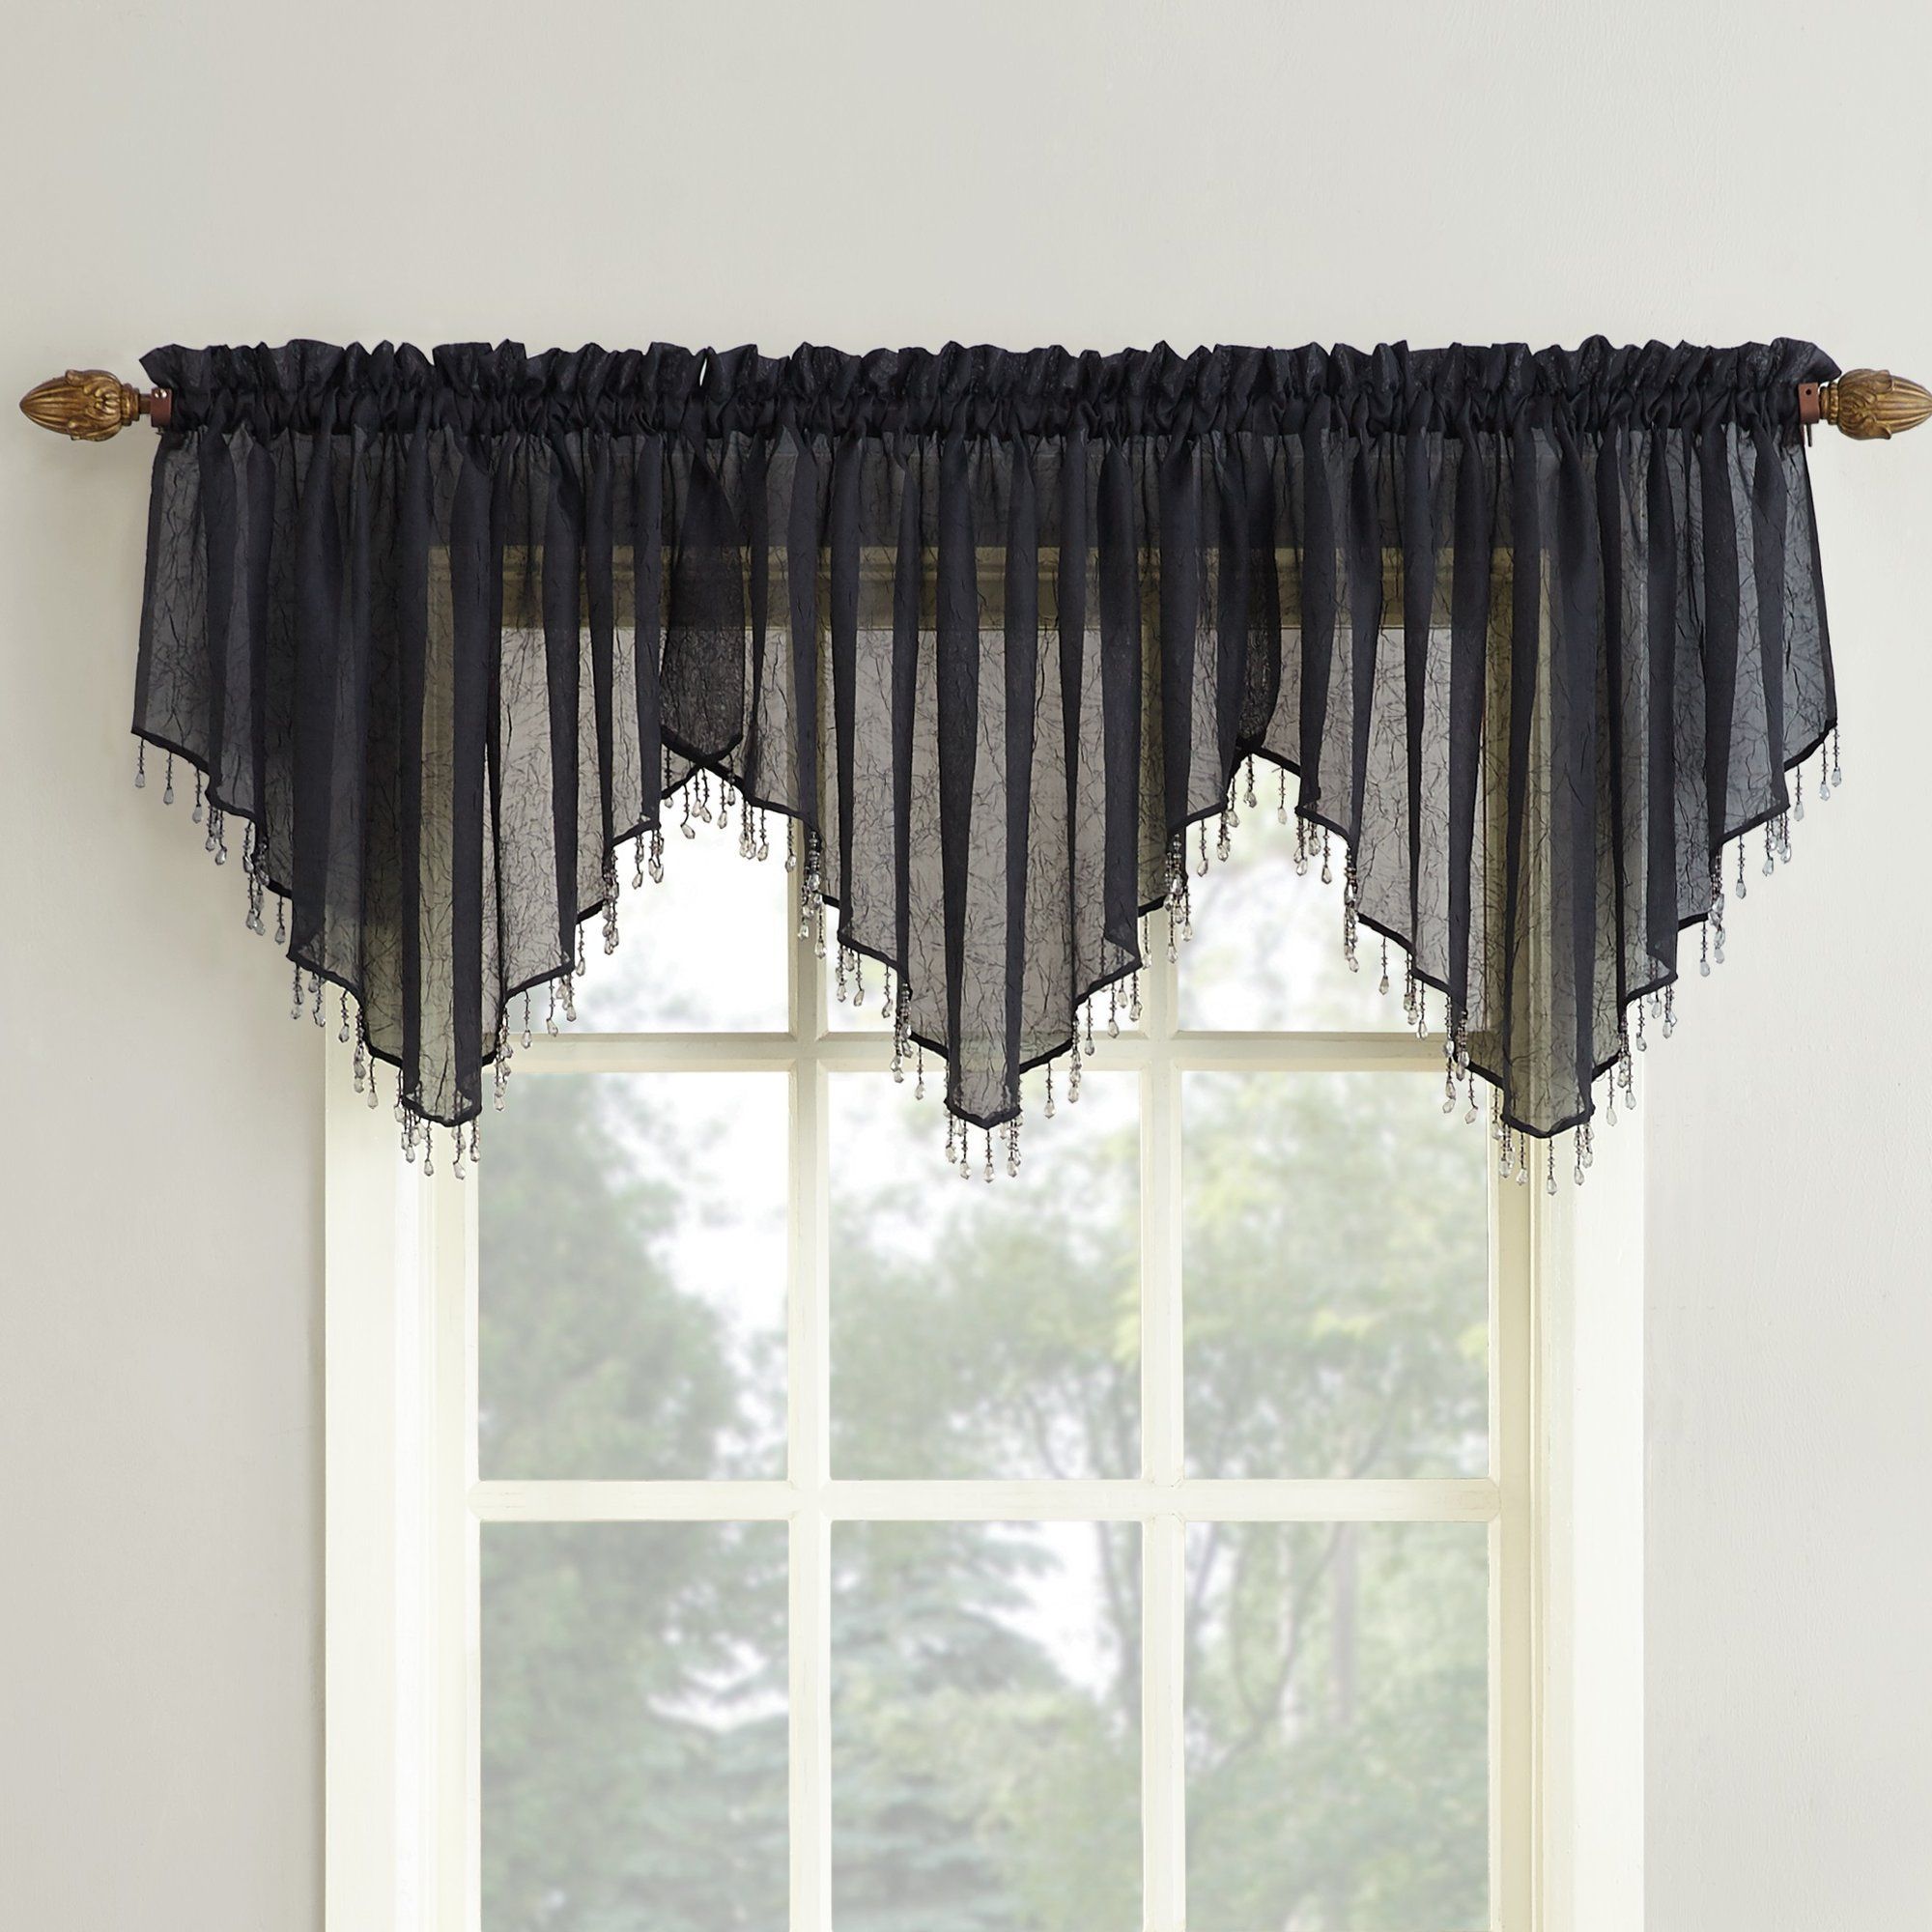 Sheffield Sheer Voile 51" Curtain Valance | Cool Shit Pertaining To Vertical Ruffled Waterfall Valances And Curtain Tiers (View 11 of 20)